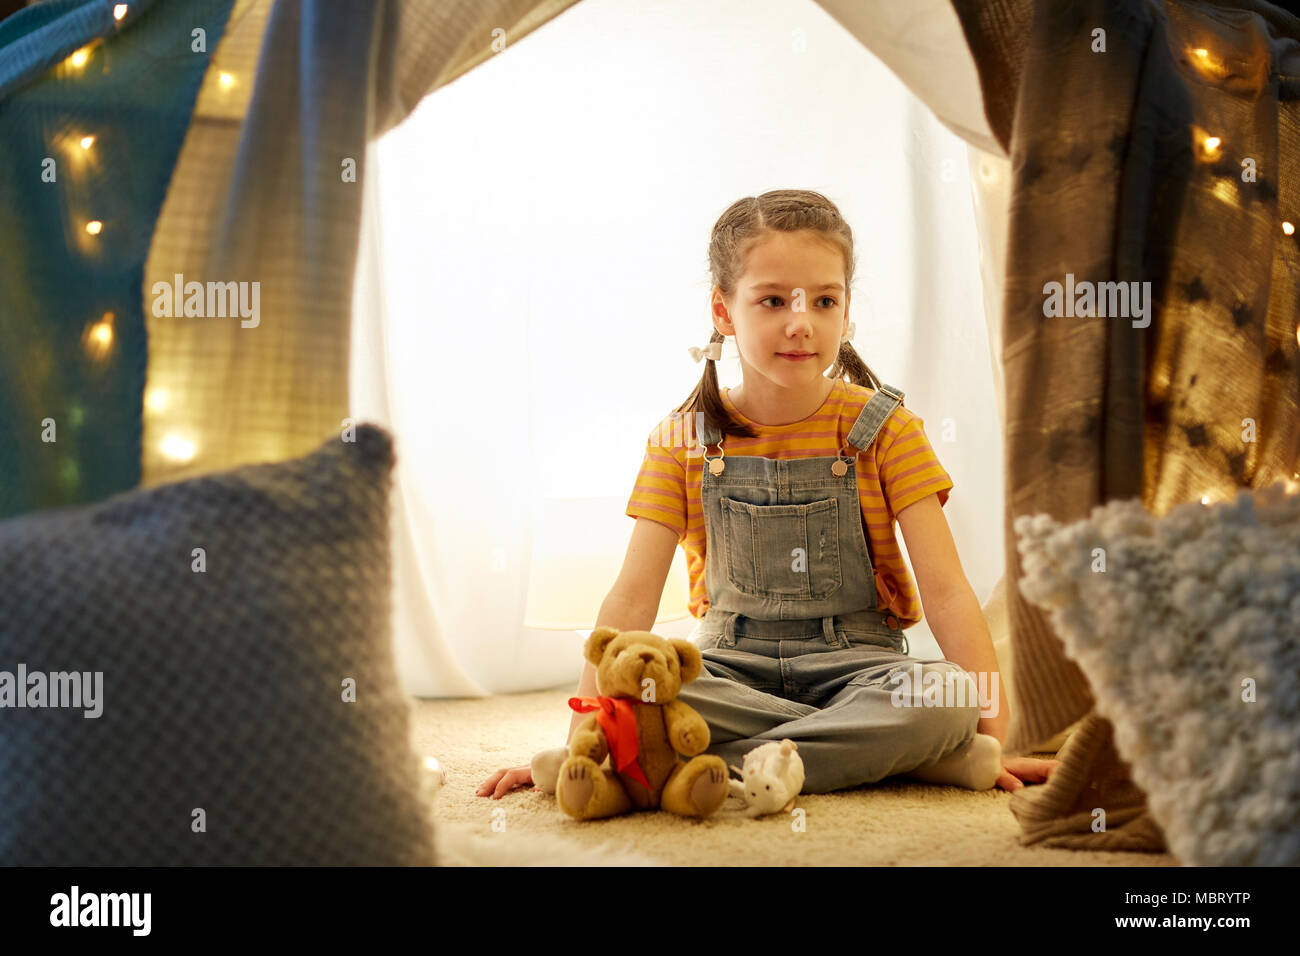 little girl with toys in kids tent at home Stock Photo